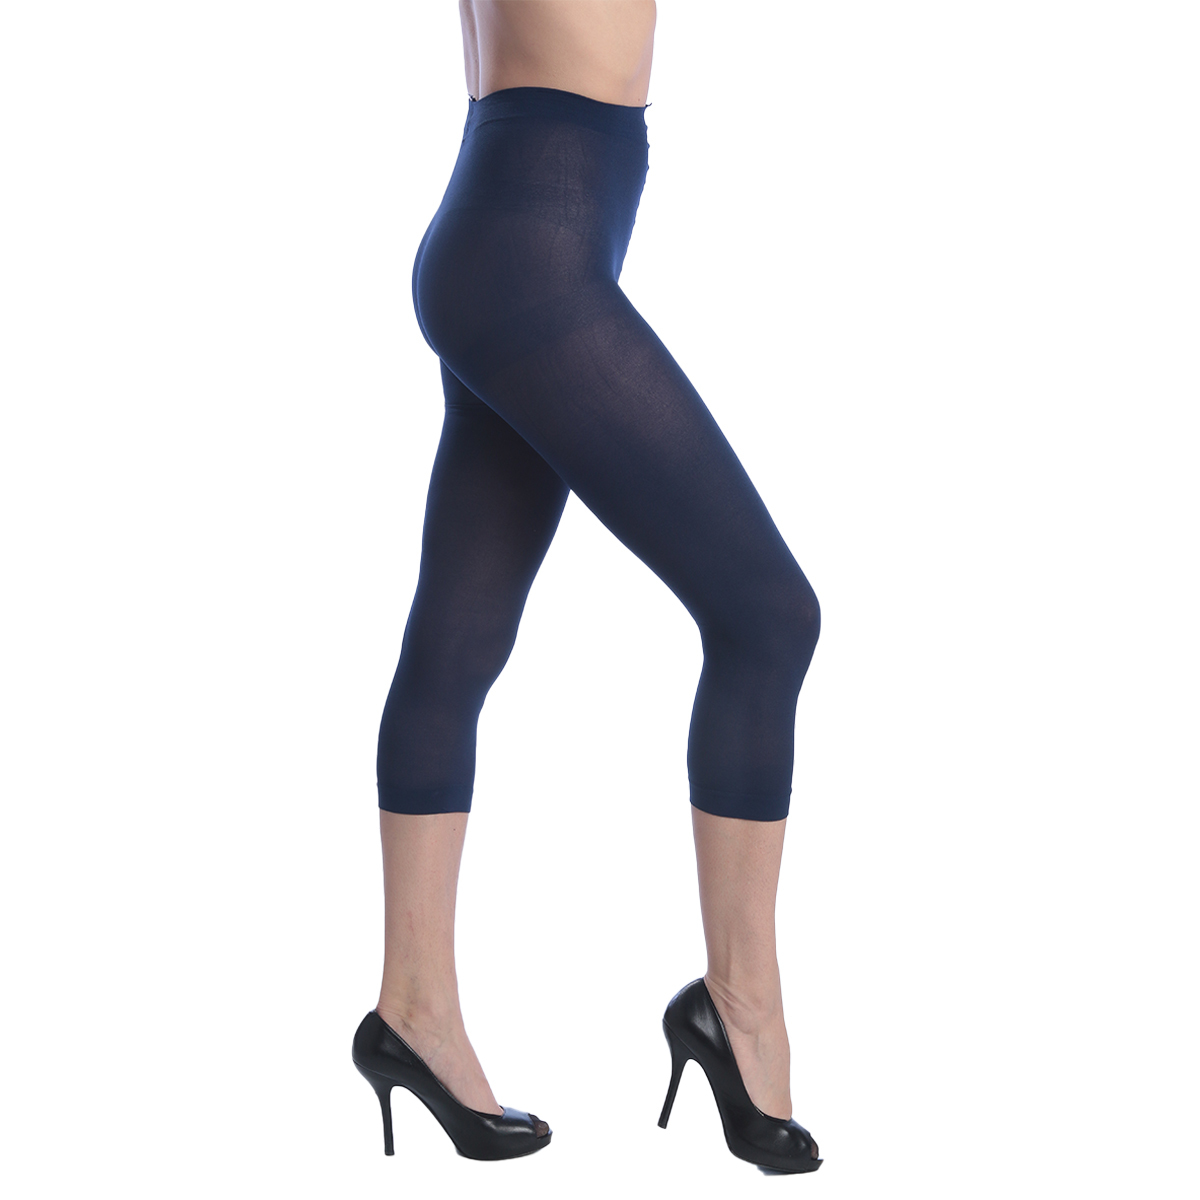 Women's Opaque Footless Capri Tights - Navy, One Size Fits Most